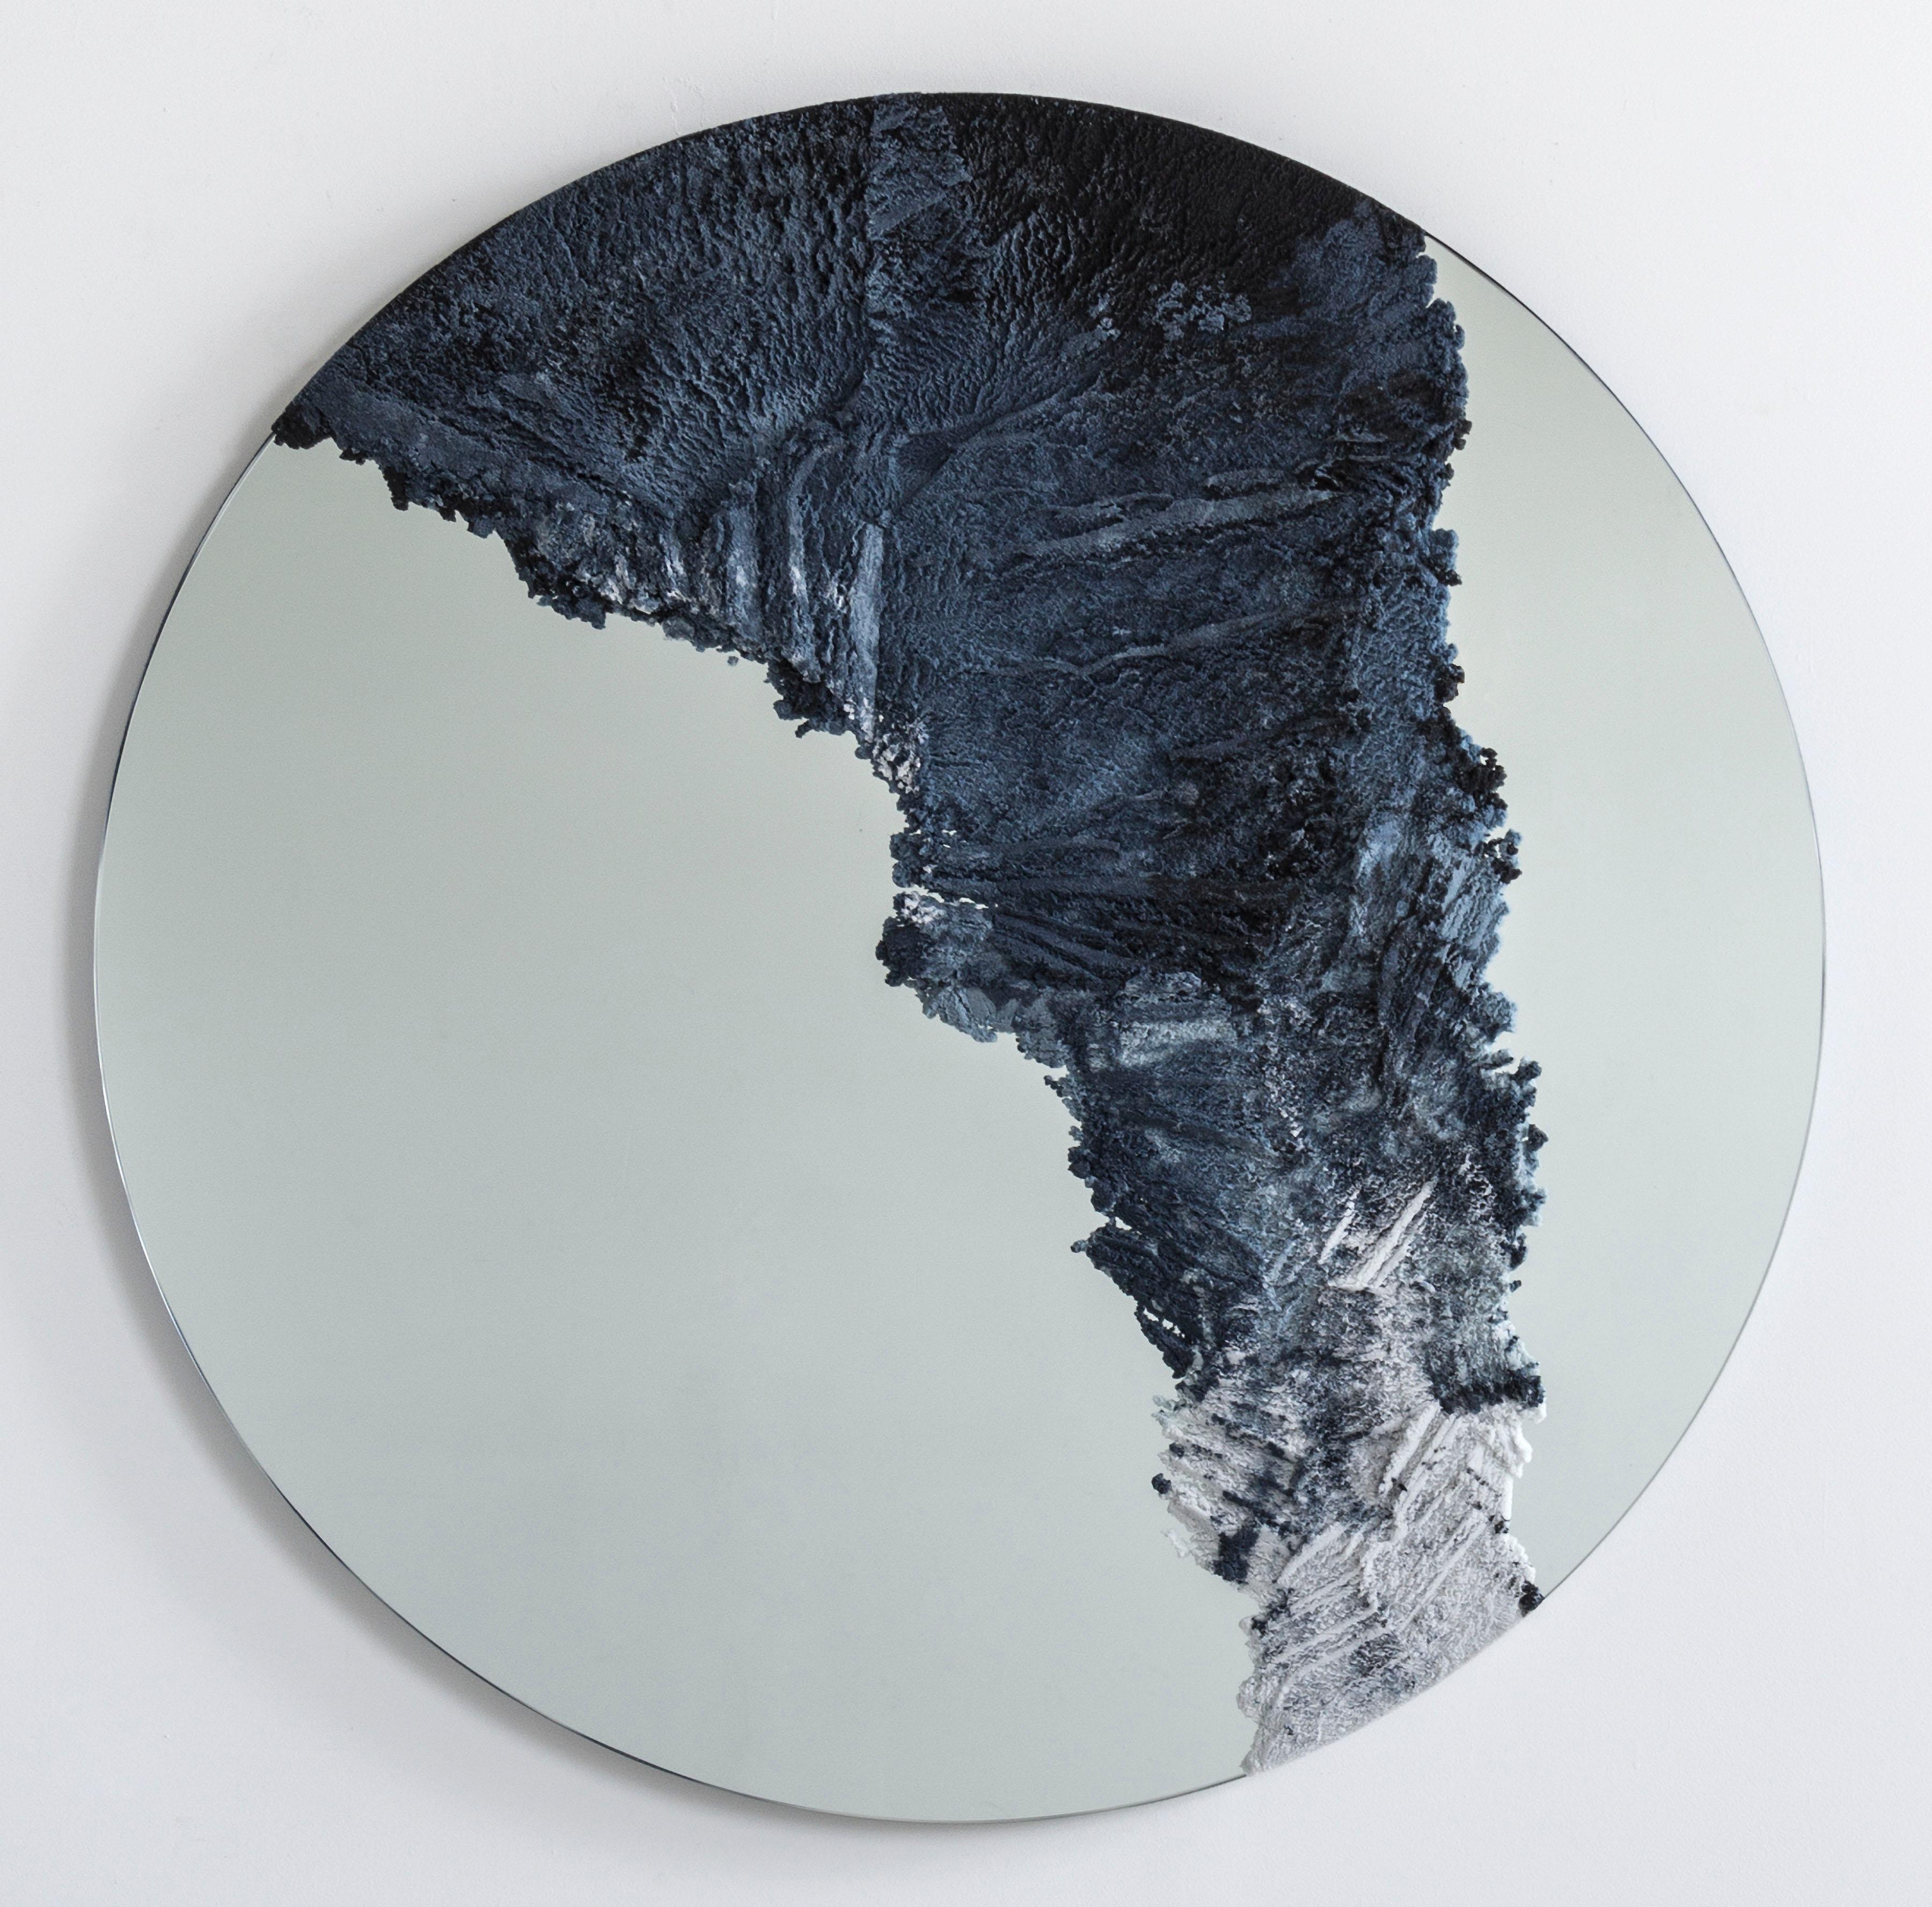 Through a layering of hand-dyed sand, the mirror consists of gradient tones and textures suggesting Patagonian glaciers breaking over water. The granules are stratified with nuance and delicacy, coming together in a piece that is both useful and